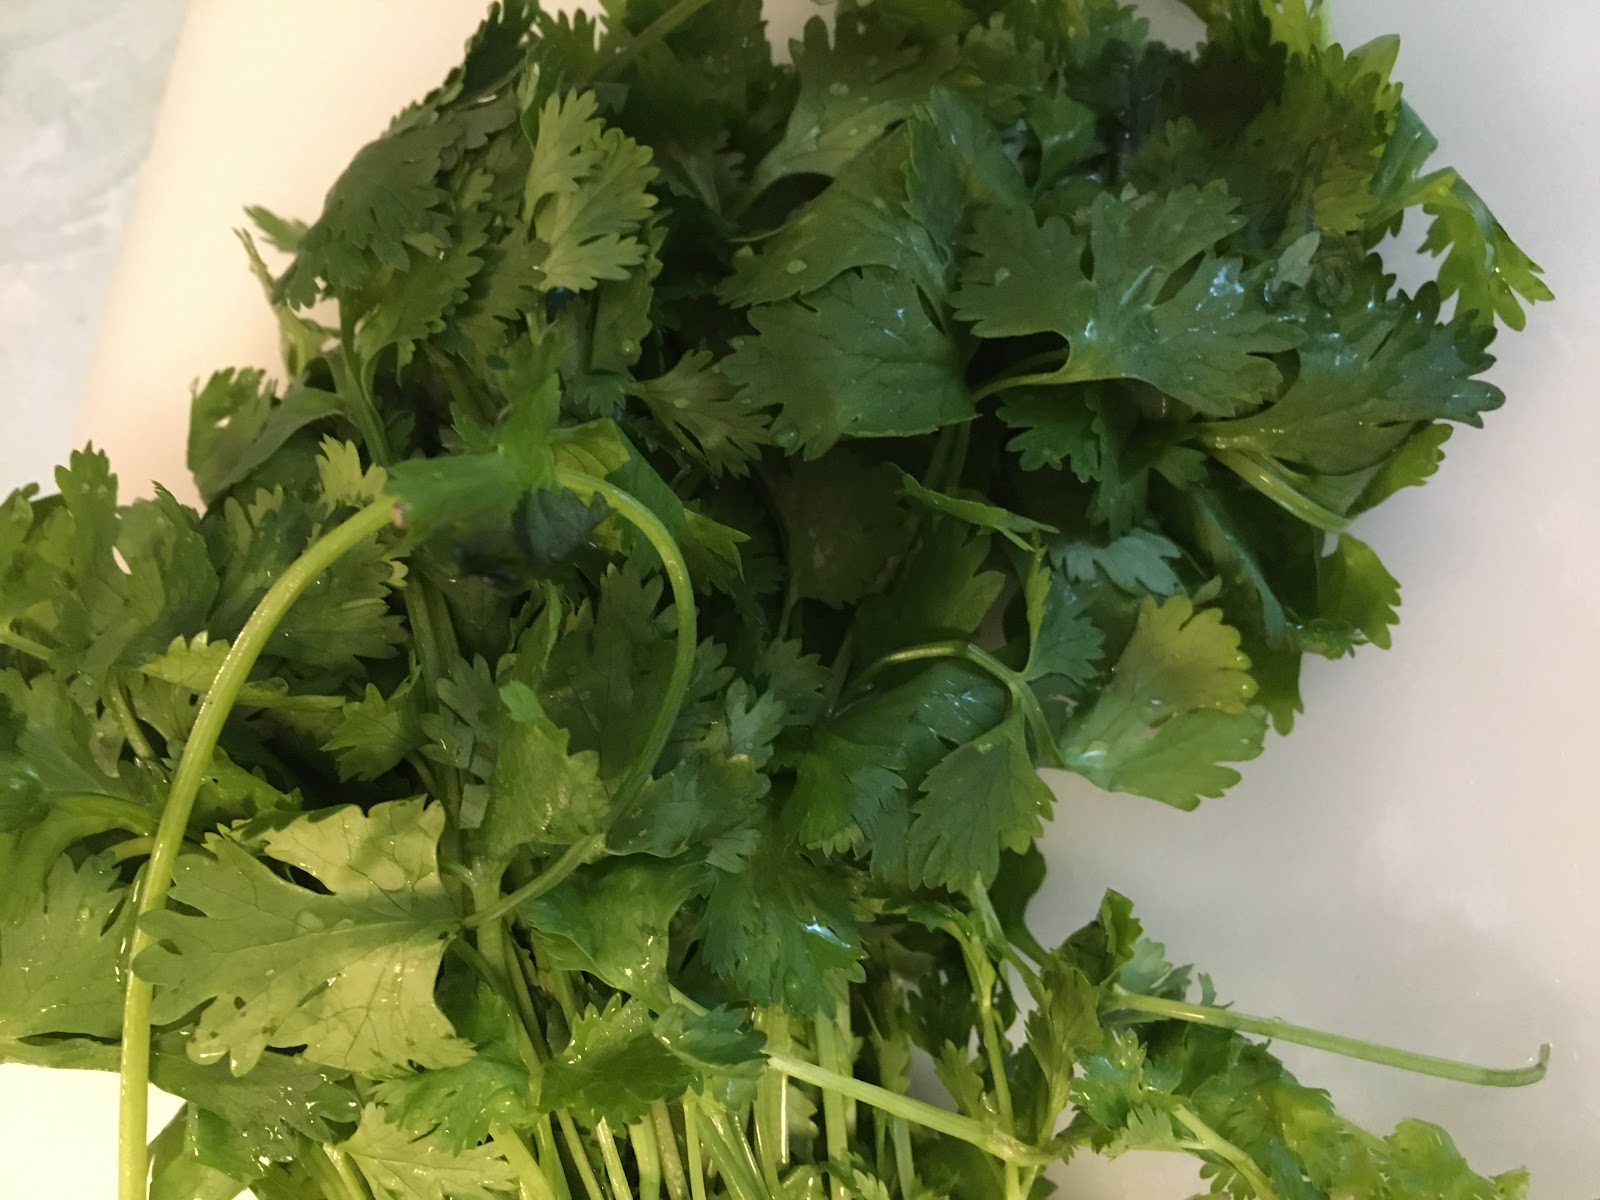 Cilantro on cutting board.  Can you smell it?  